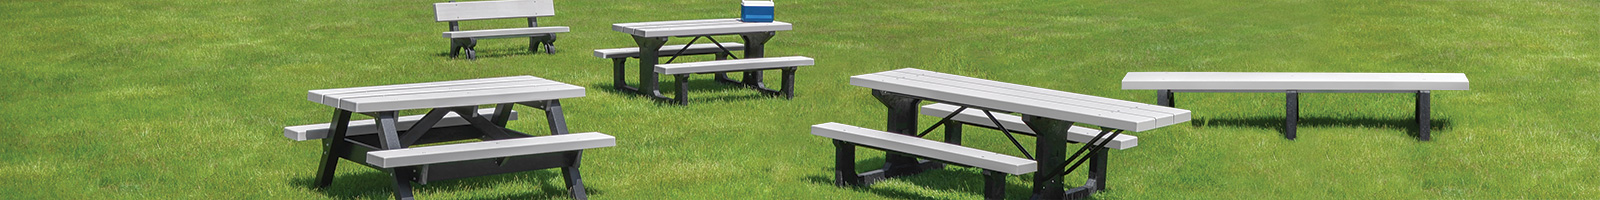 BarcoBoard Plastic Furniture Collection